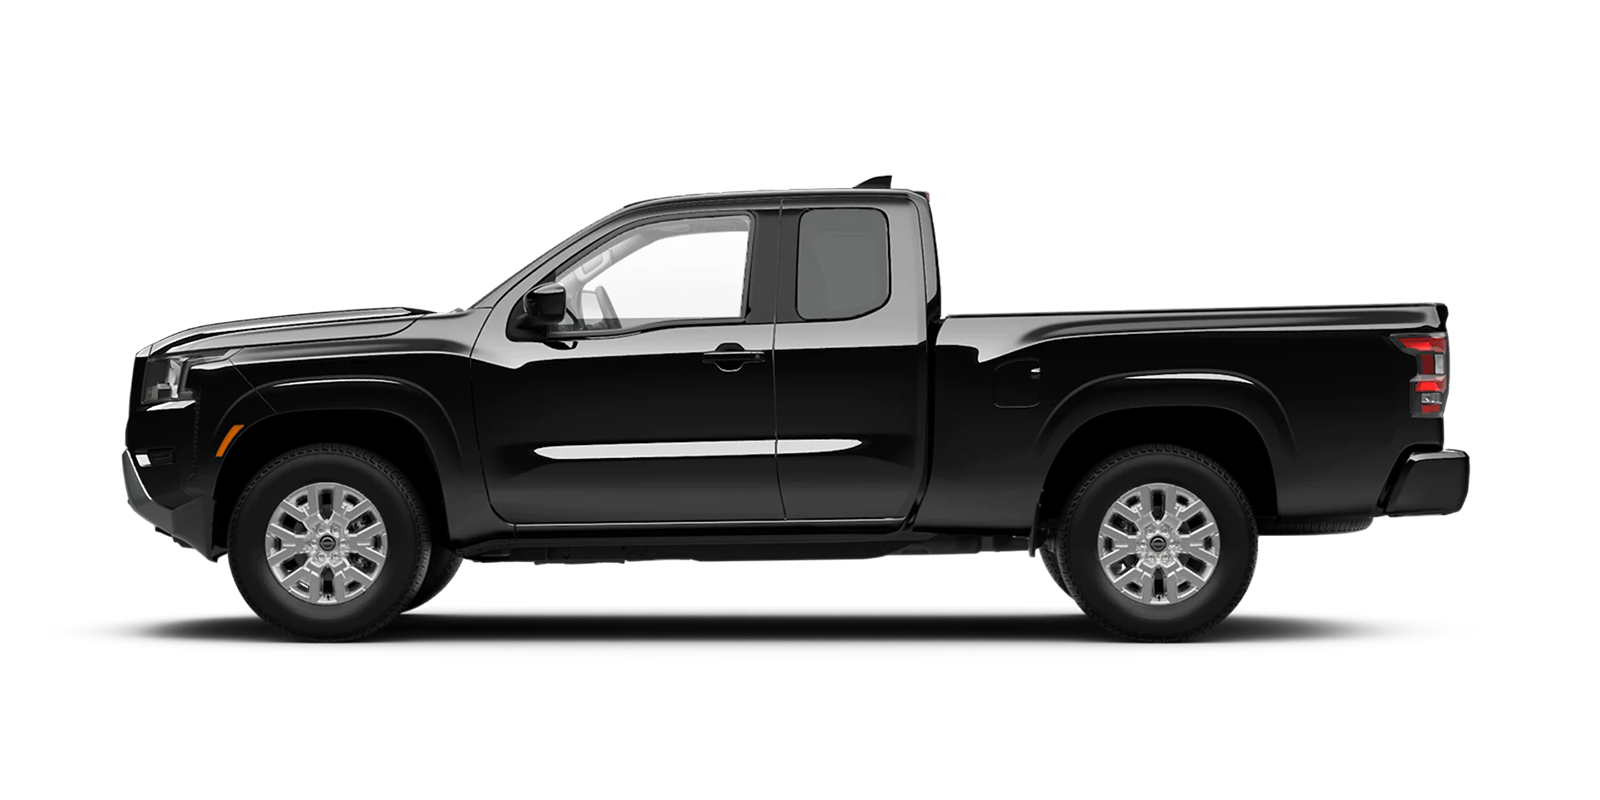 2022 Frontier King Cab SV 4x4 in Super Black | Nissan City of Springfield in Springfield NJ